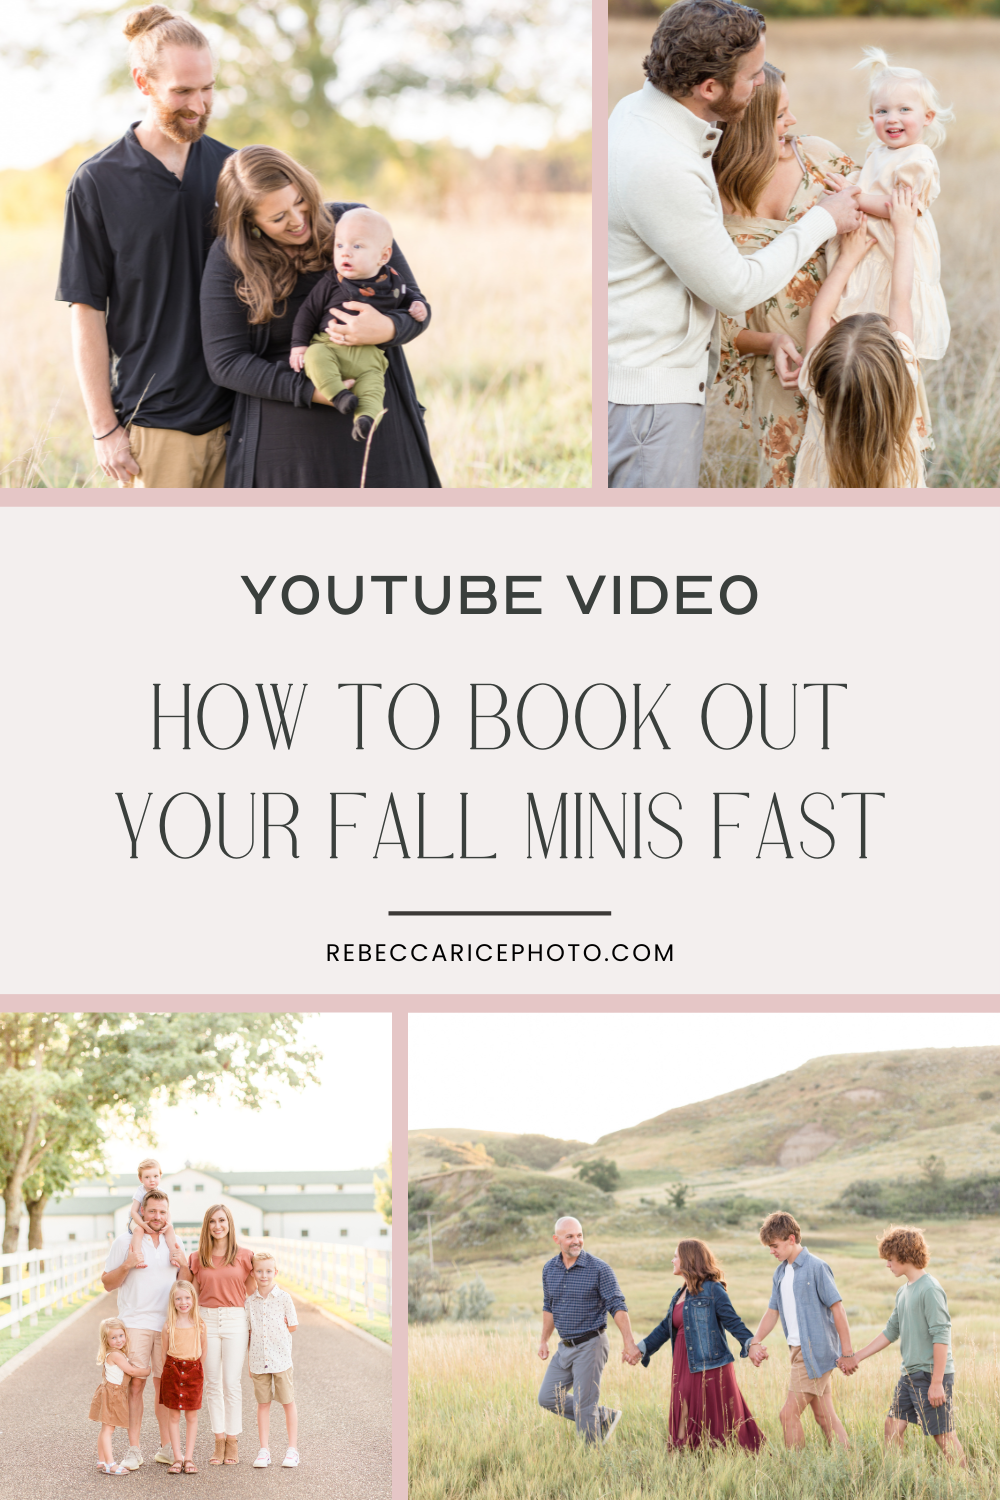 NEW YouTube Video! How to book out your fall minis FAST! Watch live on the blog or YouTube TODAY!! -rebeccaricephoto.com